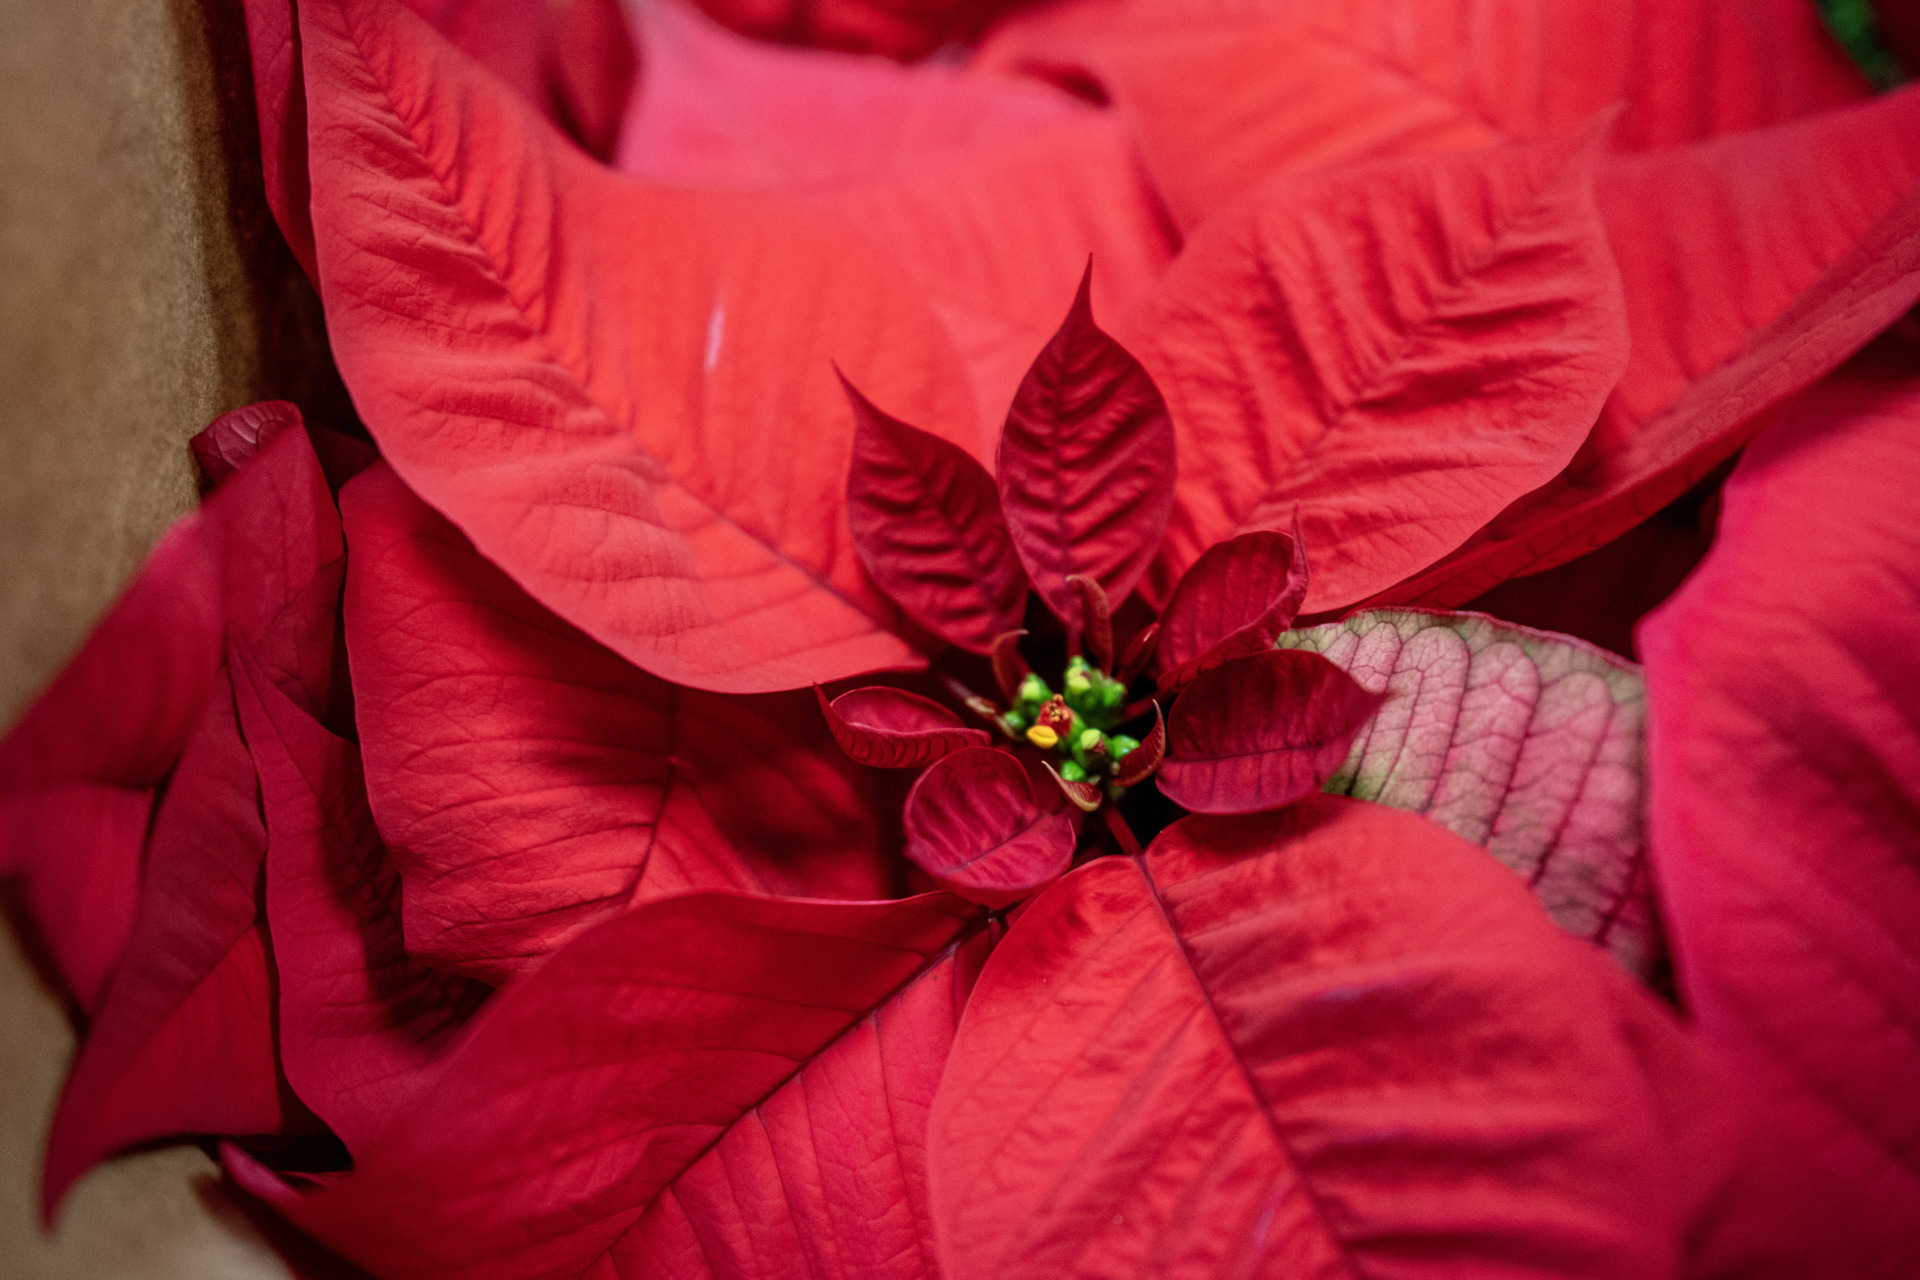 Setting your poinsettias up for success